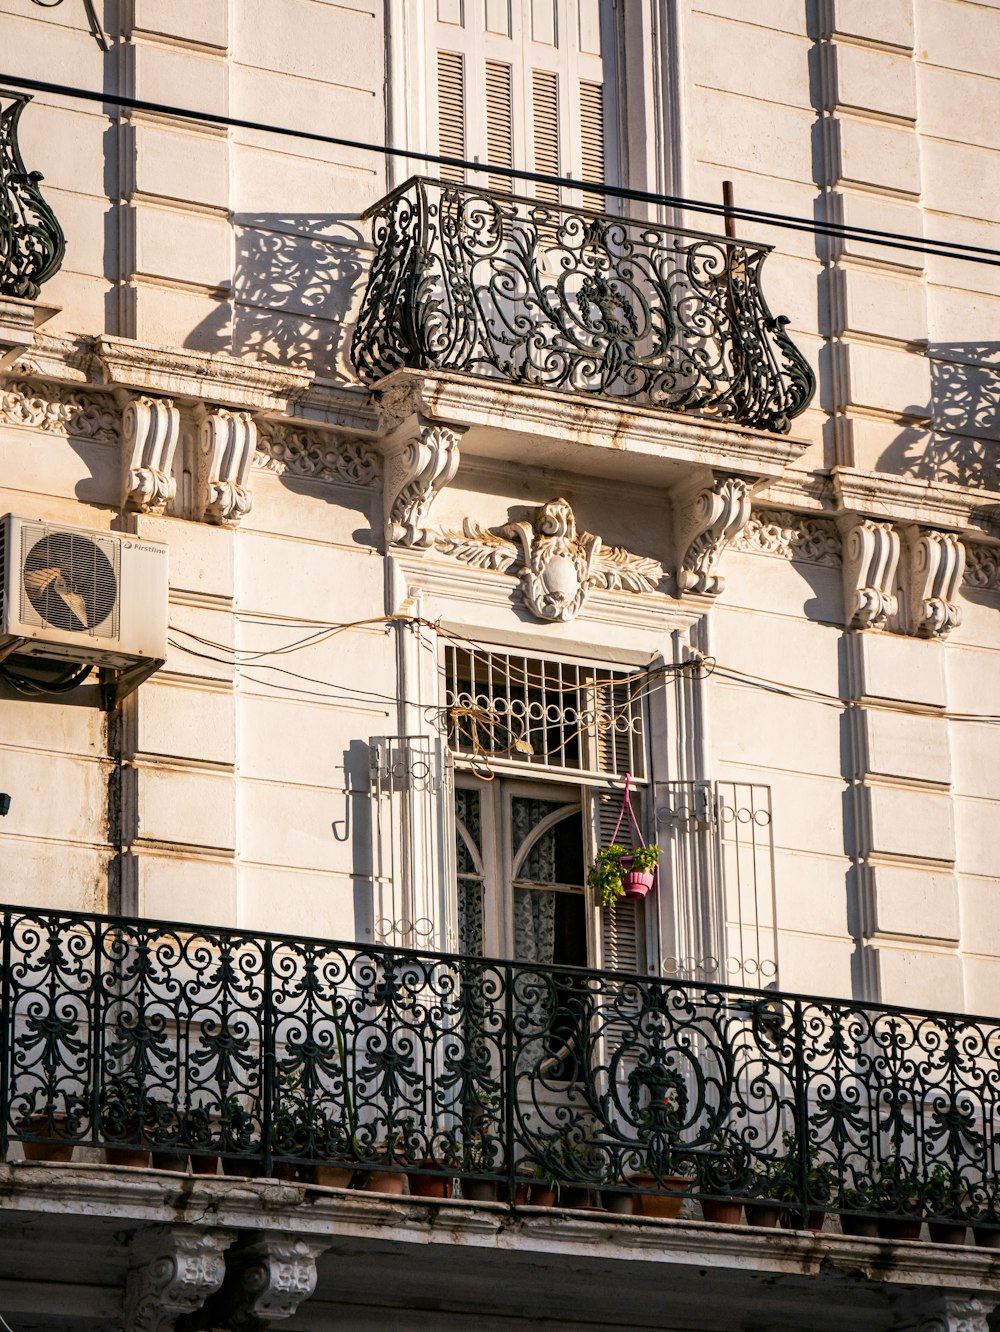 the balcony of a building with wrought iron balconies